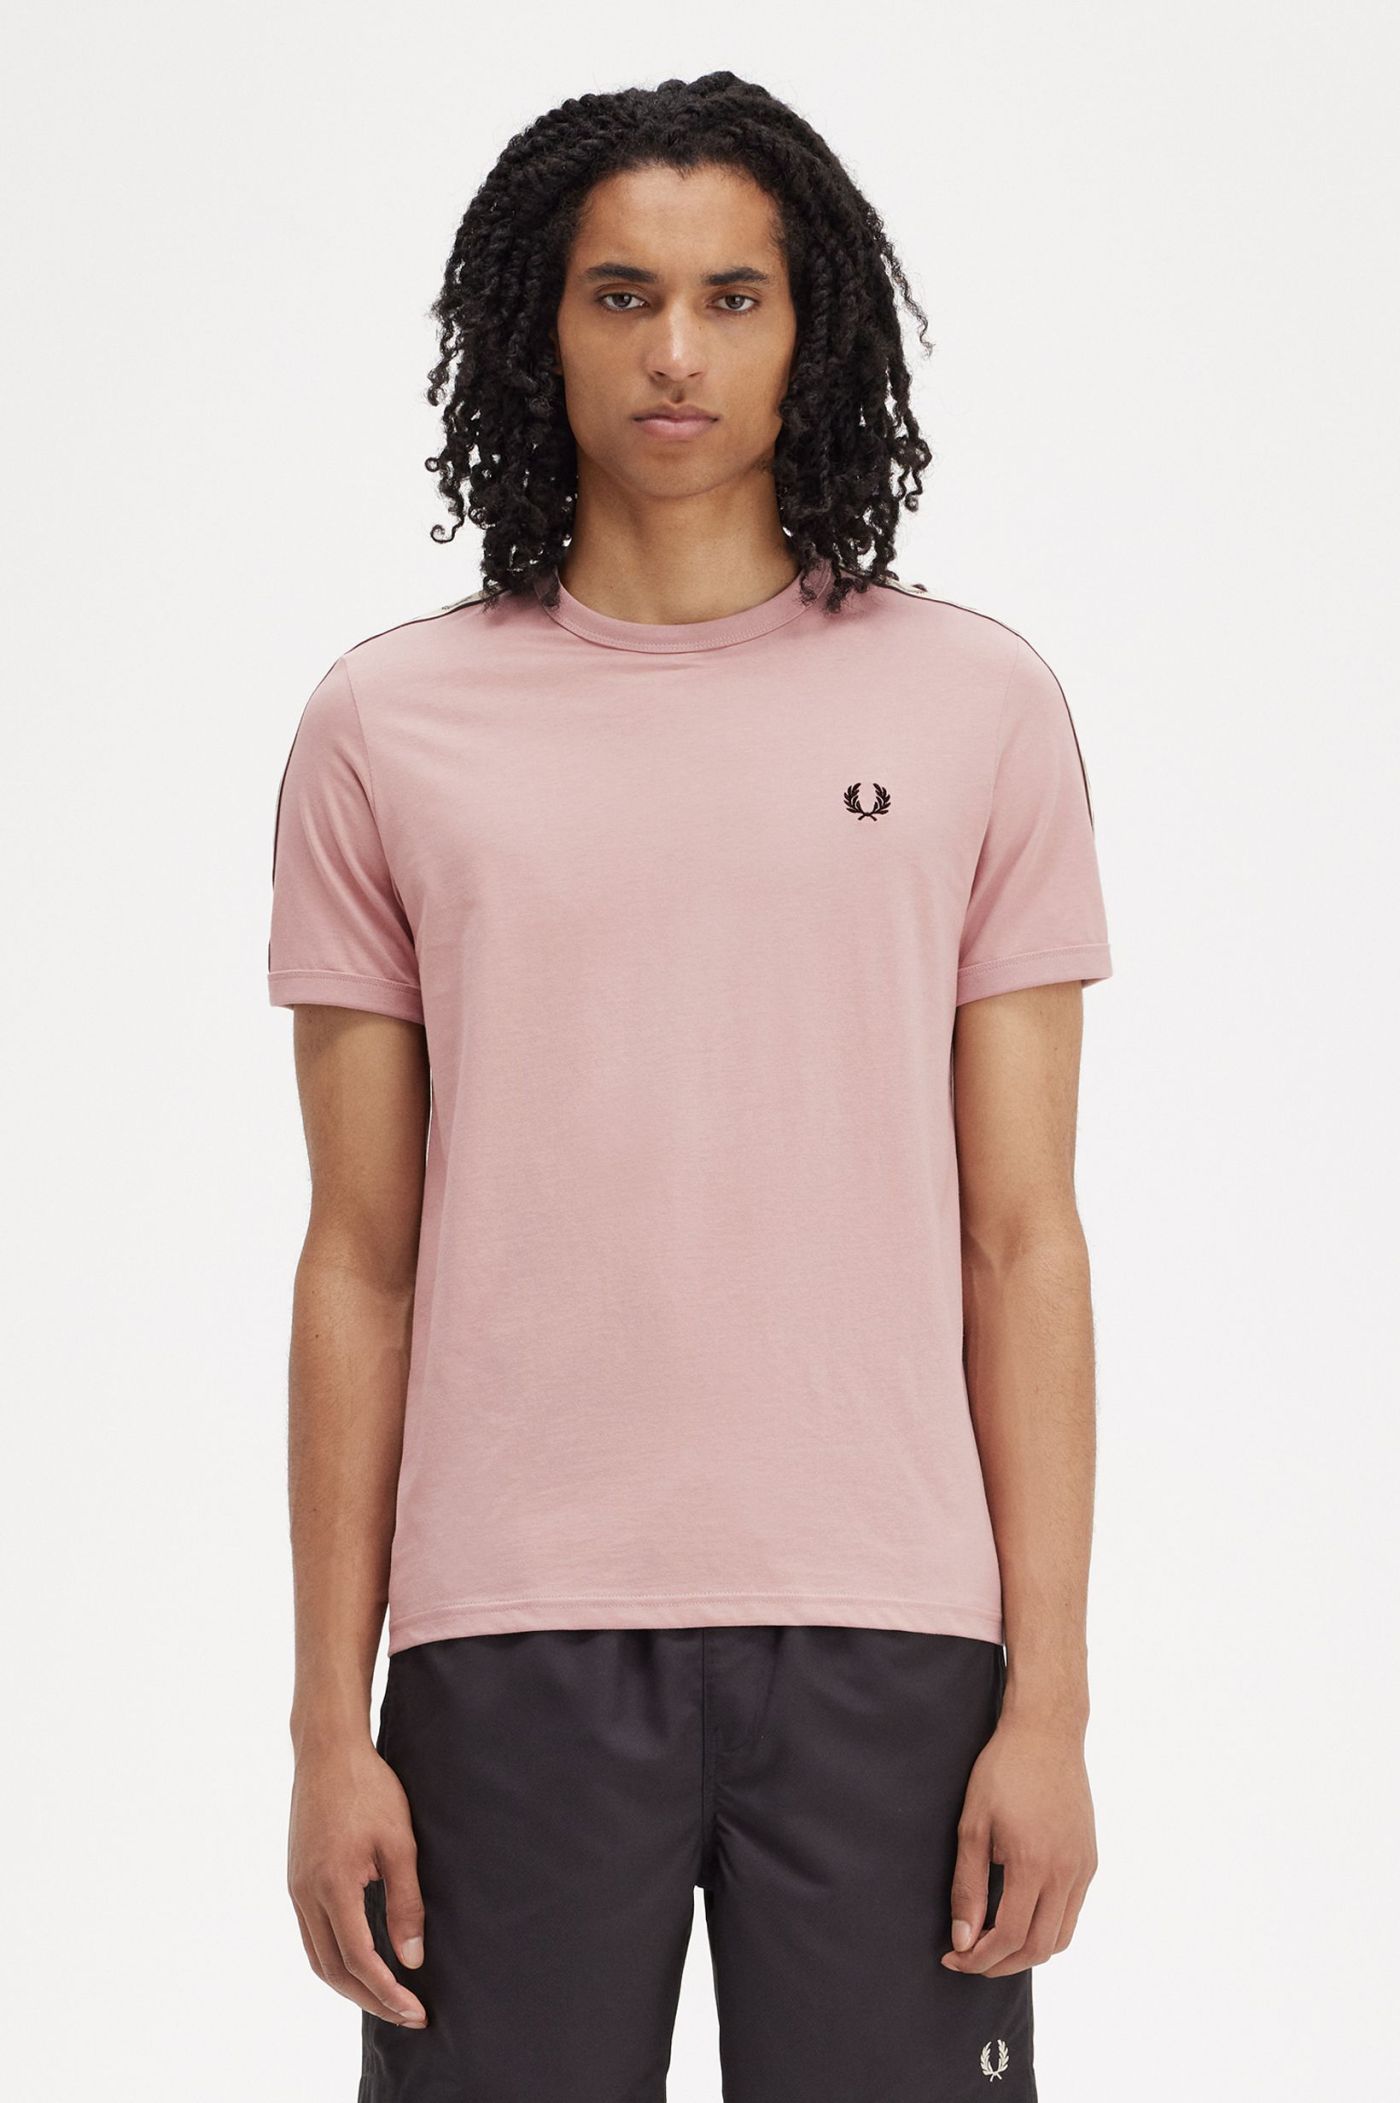 Contrast Tape Ringer T-Shirt - Dusty Rose Pink / Black - Fred Perry